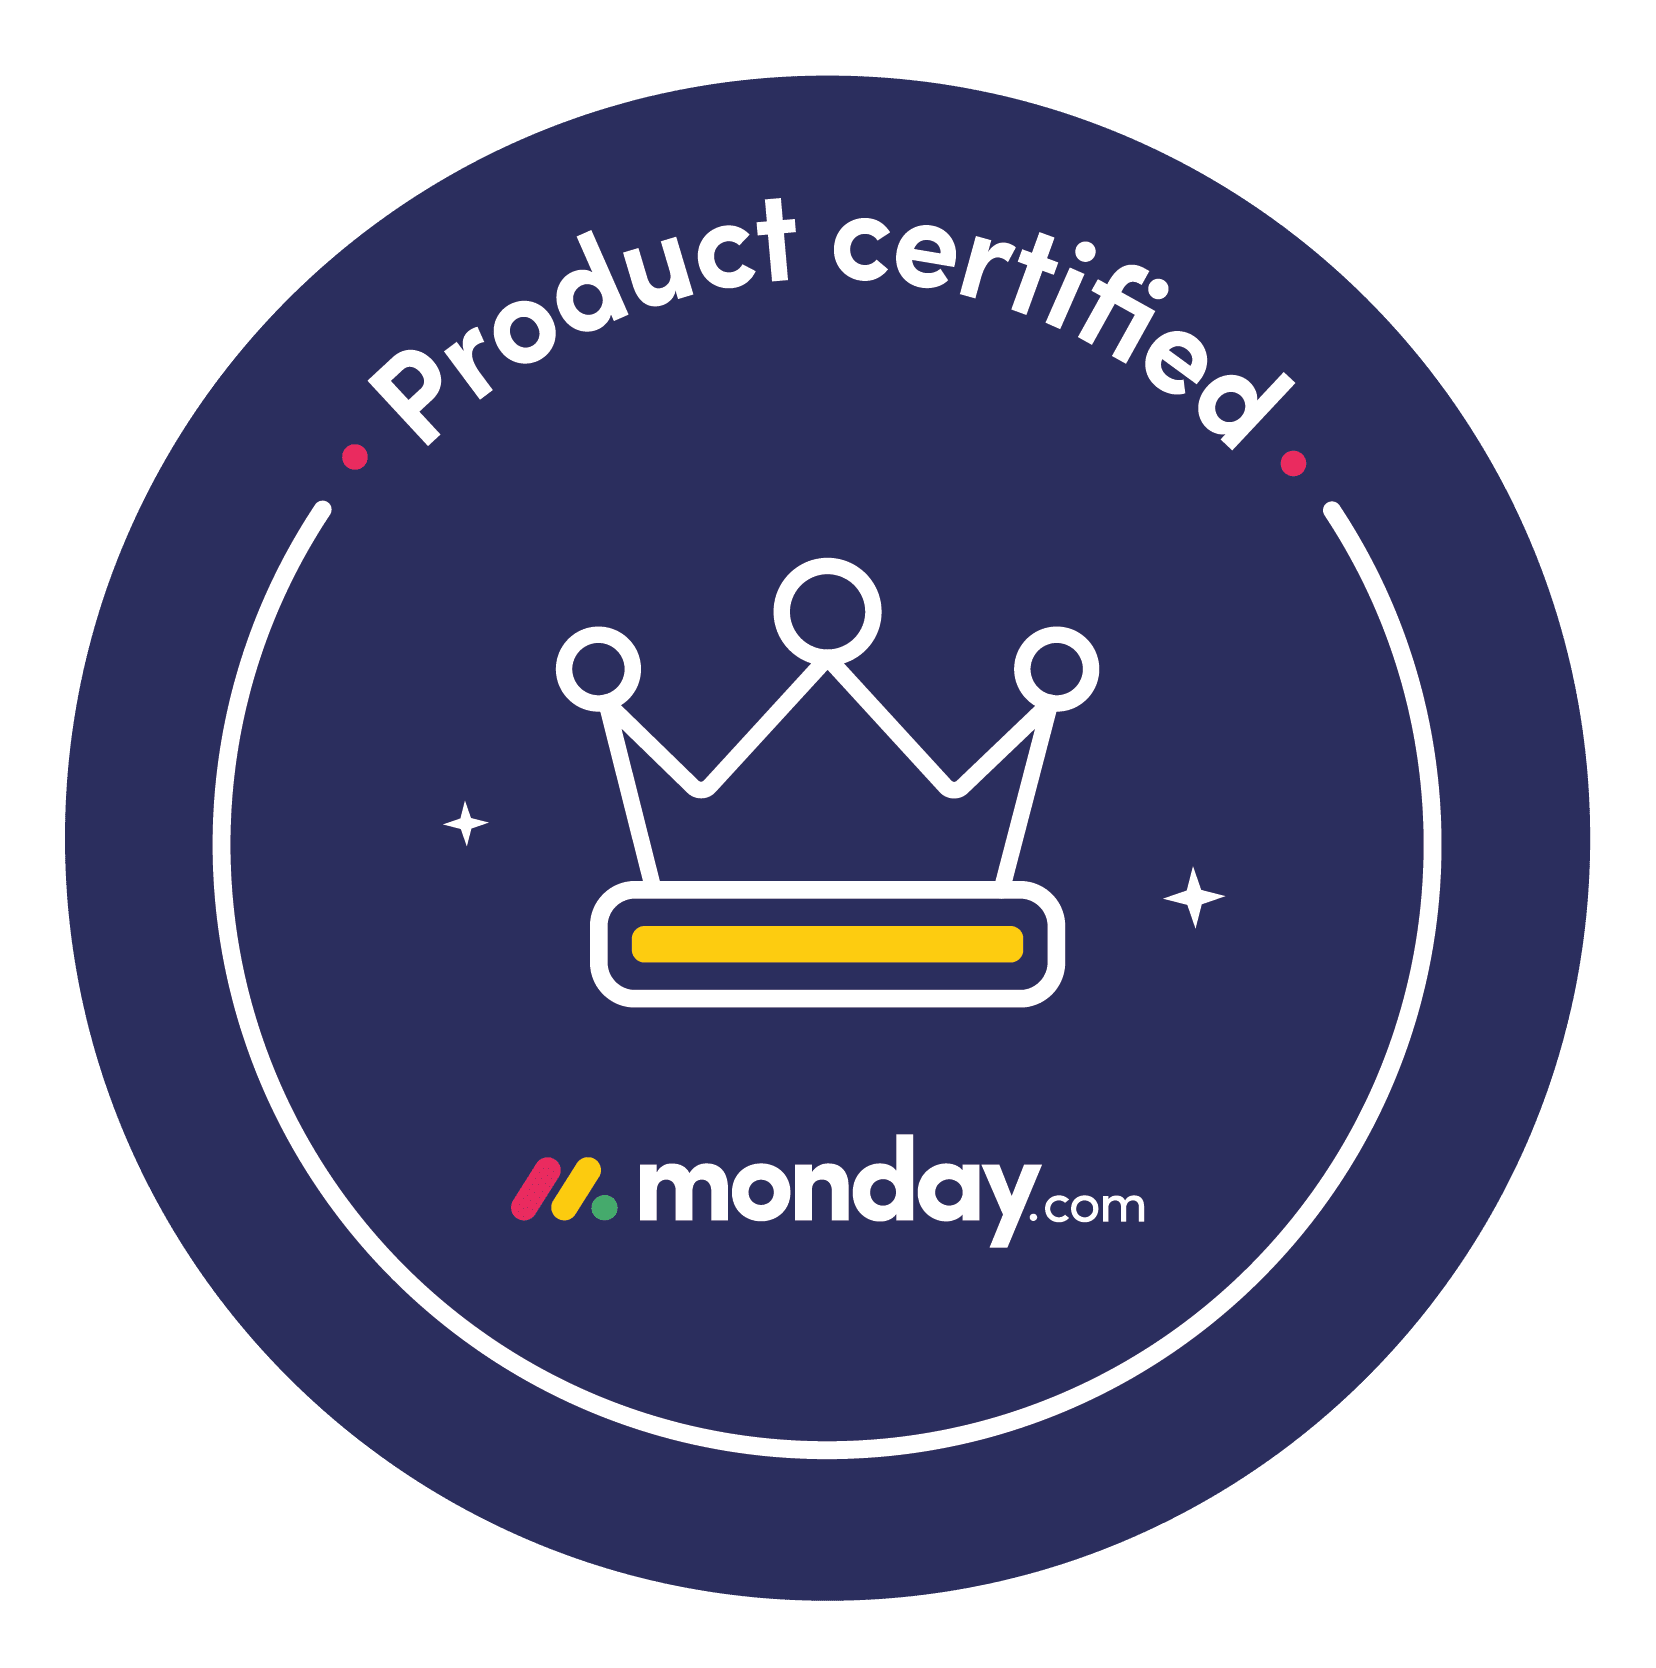 Monday.com Product Certified